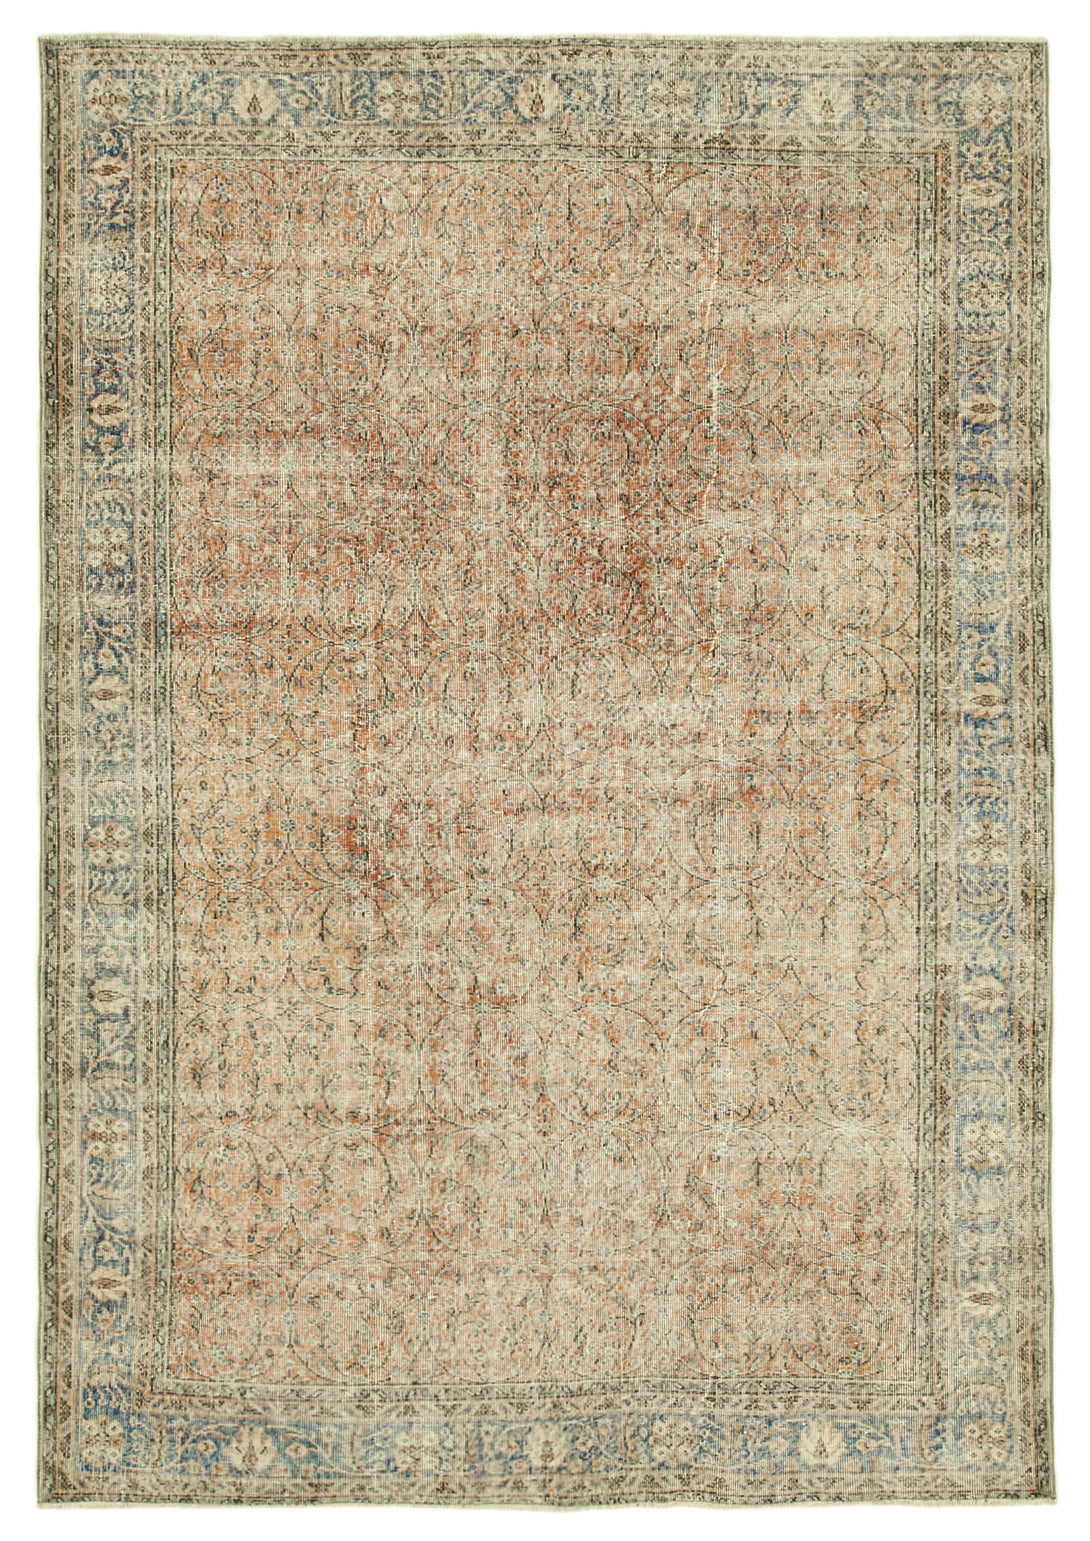 Handmade White Wash Area Rug > Design# OL-AC-38744 > Size: 6'-11" x 10'-1", Carpet Culture Rugs, Handmade Rugs, NYC Rugs, New Rugs, Shop Rugs, Rug Store, Outlet Rugs, SoHo Rugs, Rugs in USA